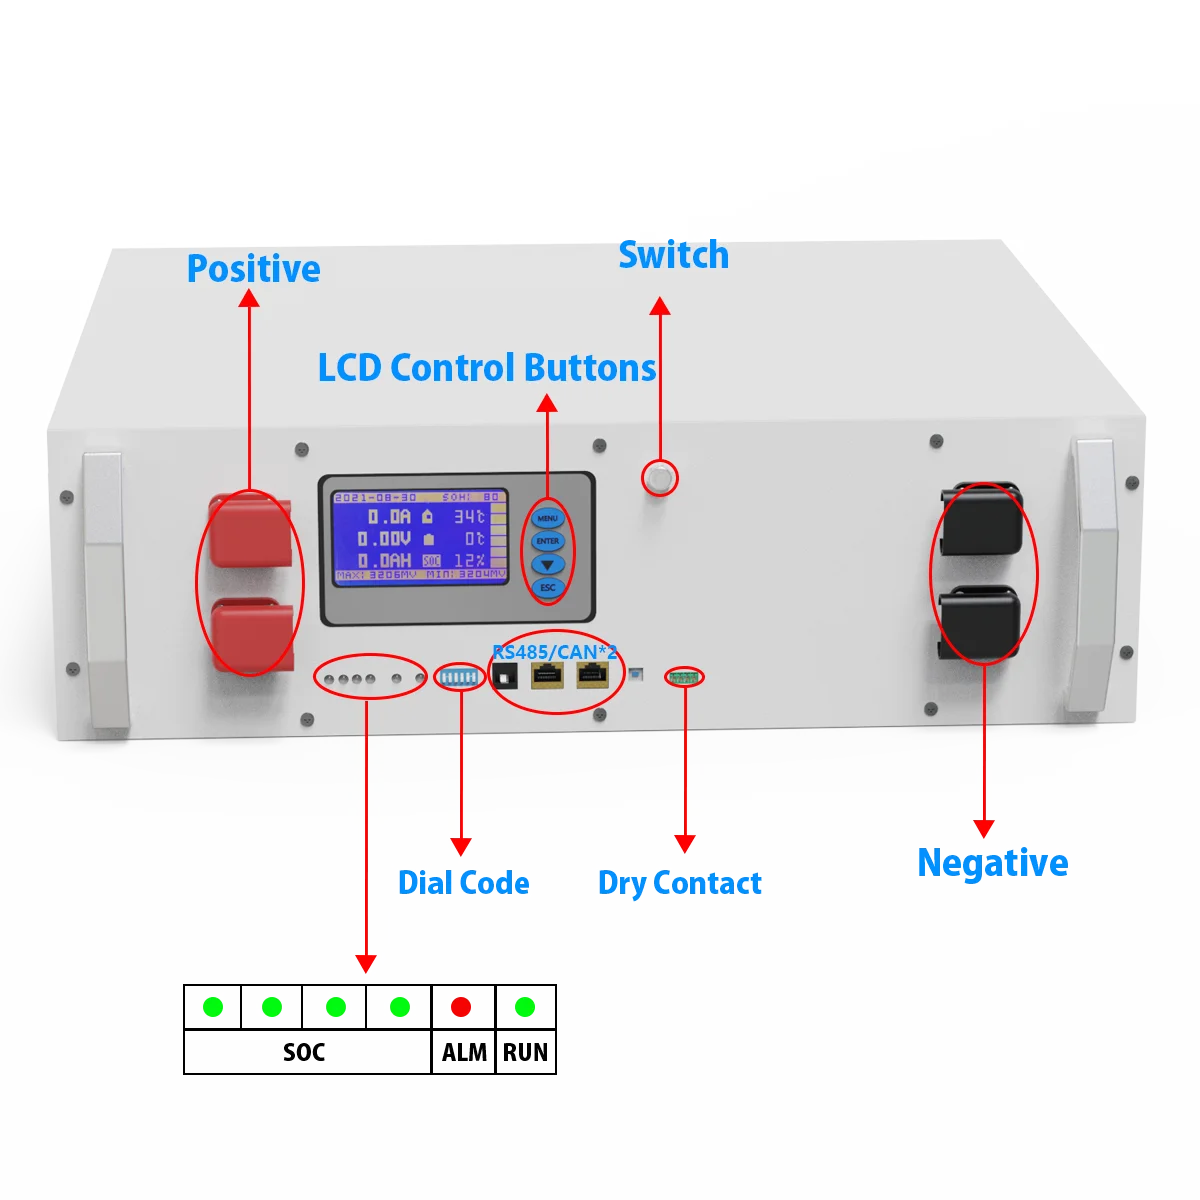 48V 120Ah LiFePO4 Battery, Advanced battery pack with LCD controls, negative terminal, and communication protocols for monitoring and control.